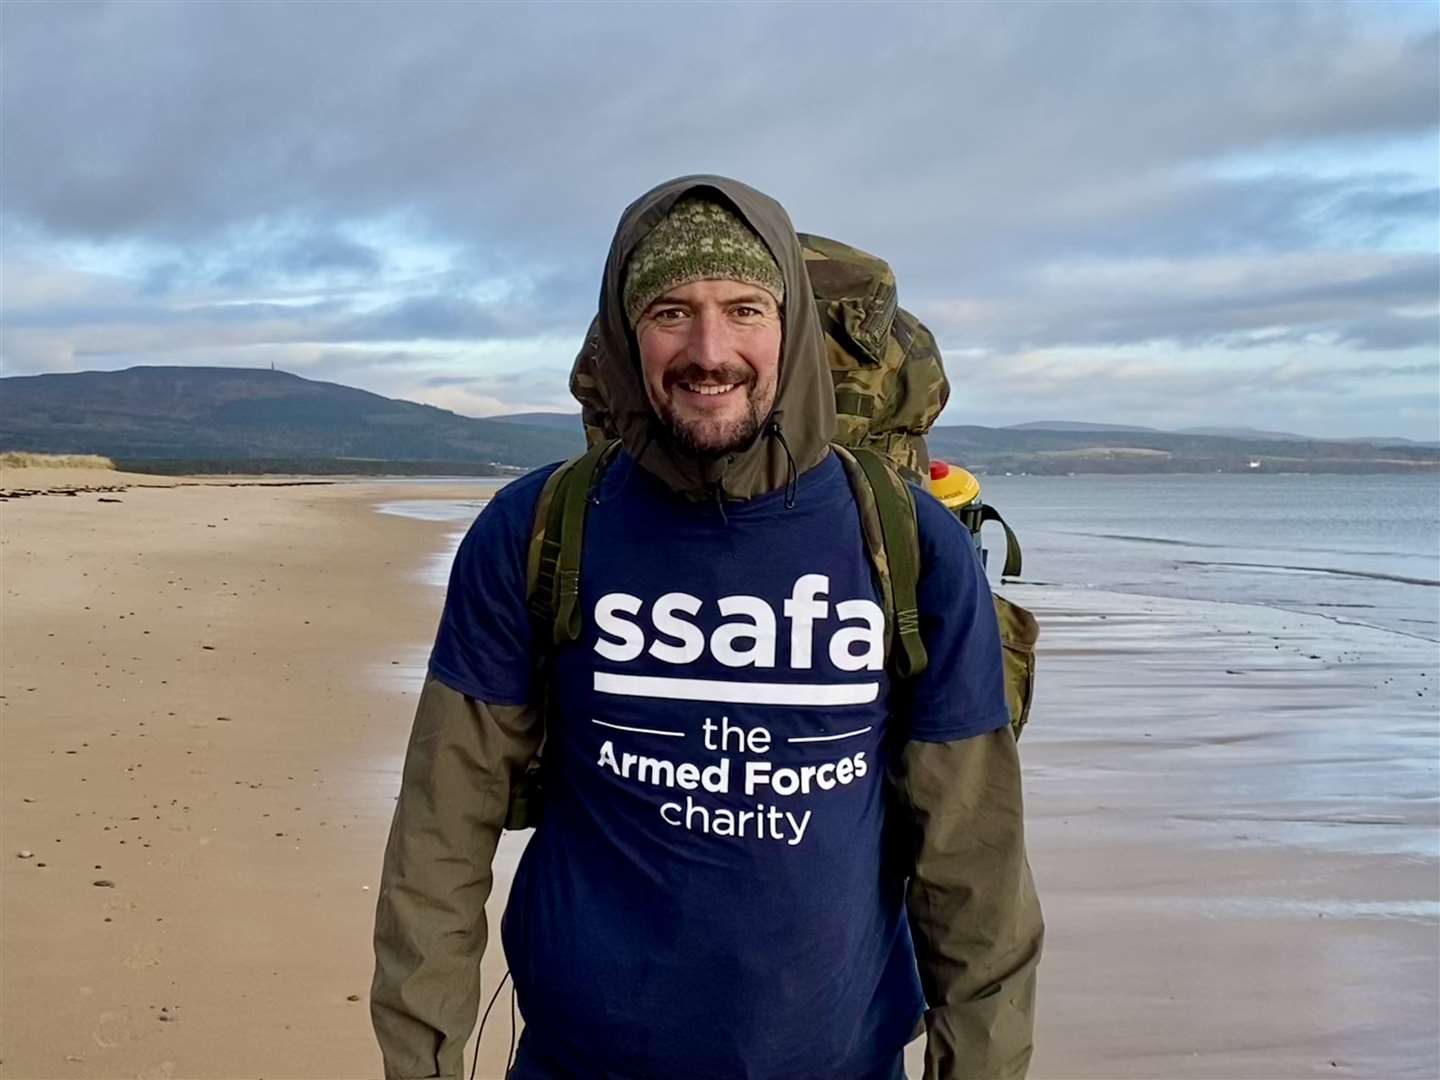 Russell Chittenden has been walking the coastline of the UK to support Armed Forces charity, SSAFA. Photo: David Richardson